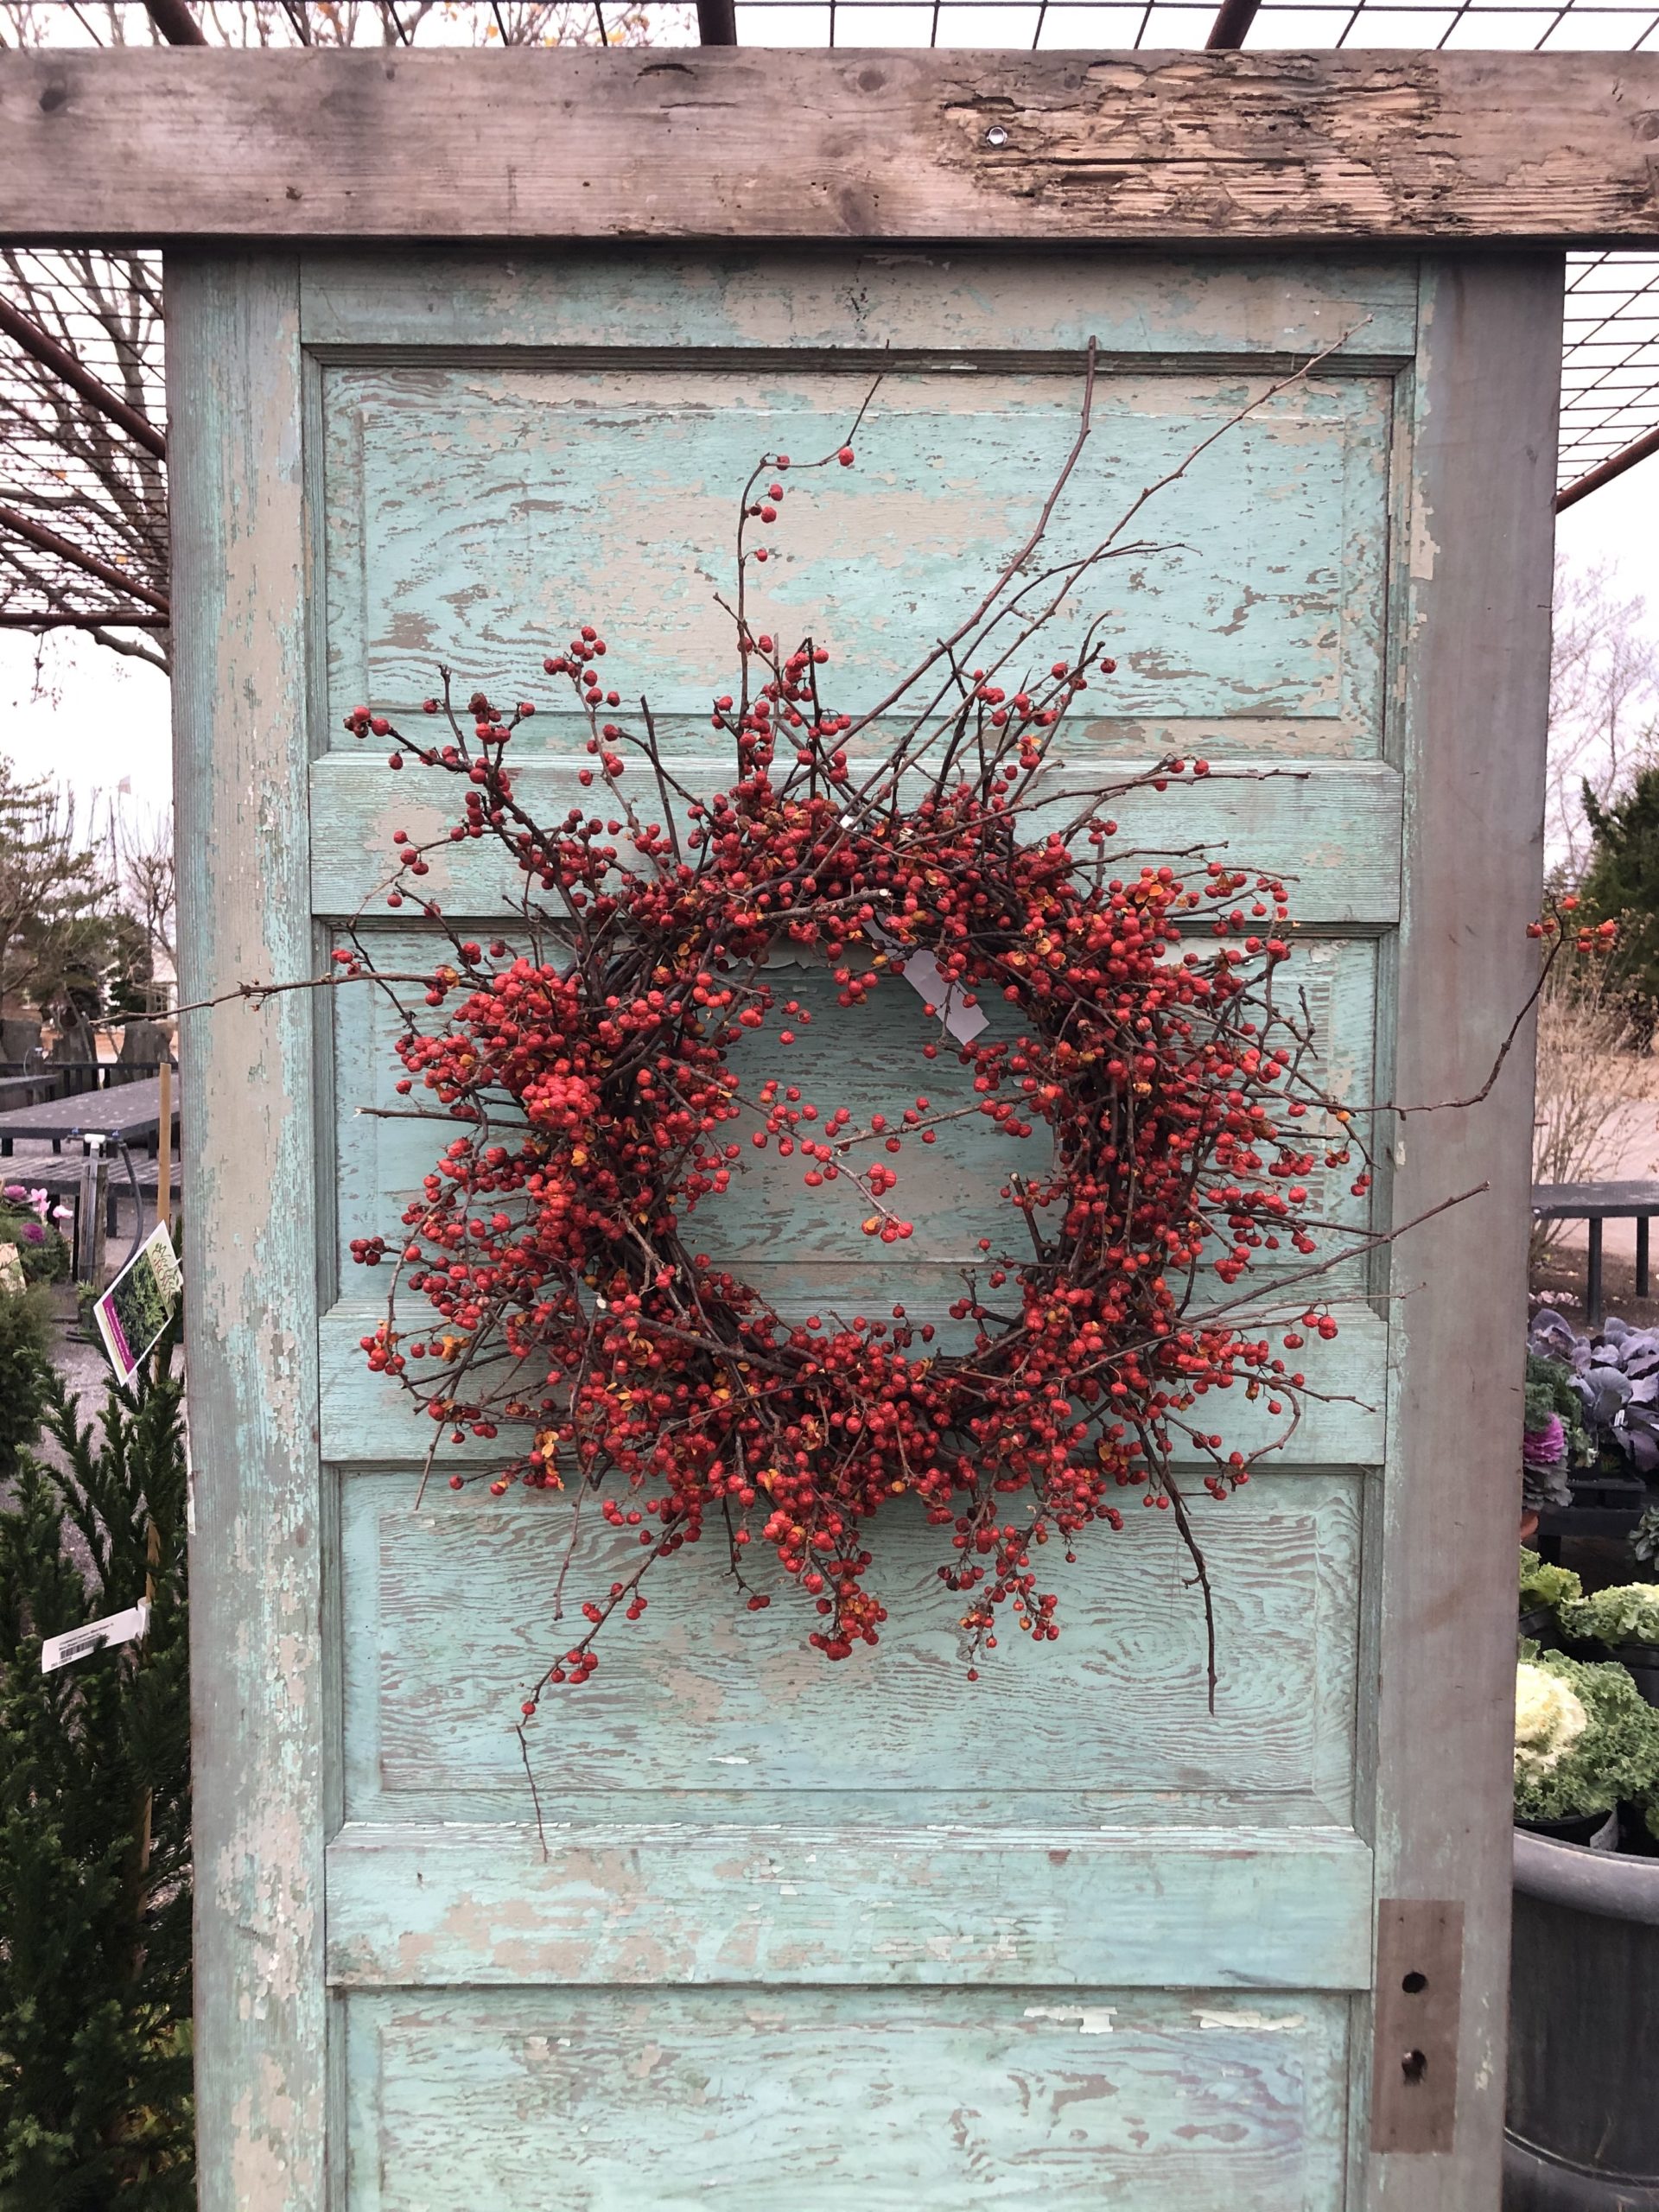 Bittersweet is an invasive vine, but it can make a beautiful wreath as Marders proves.